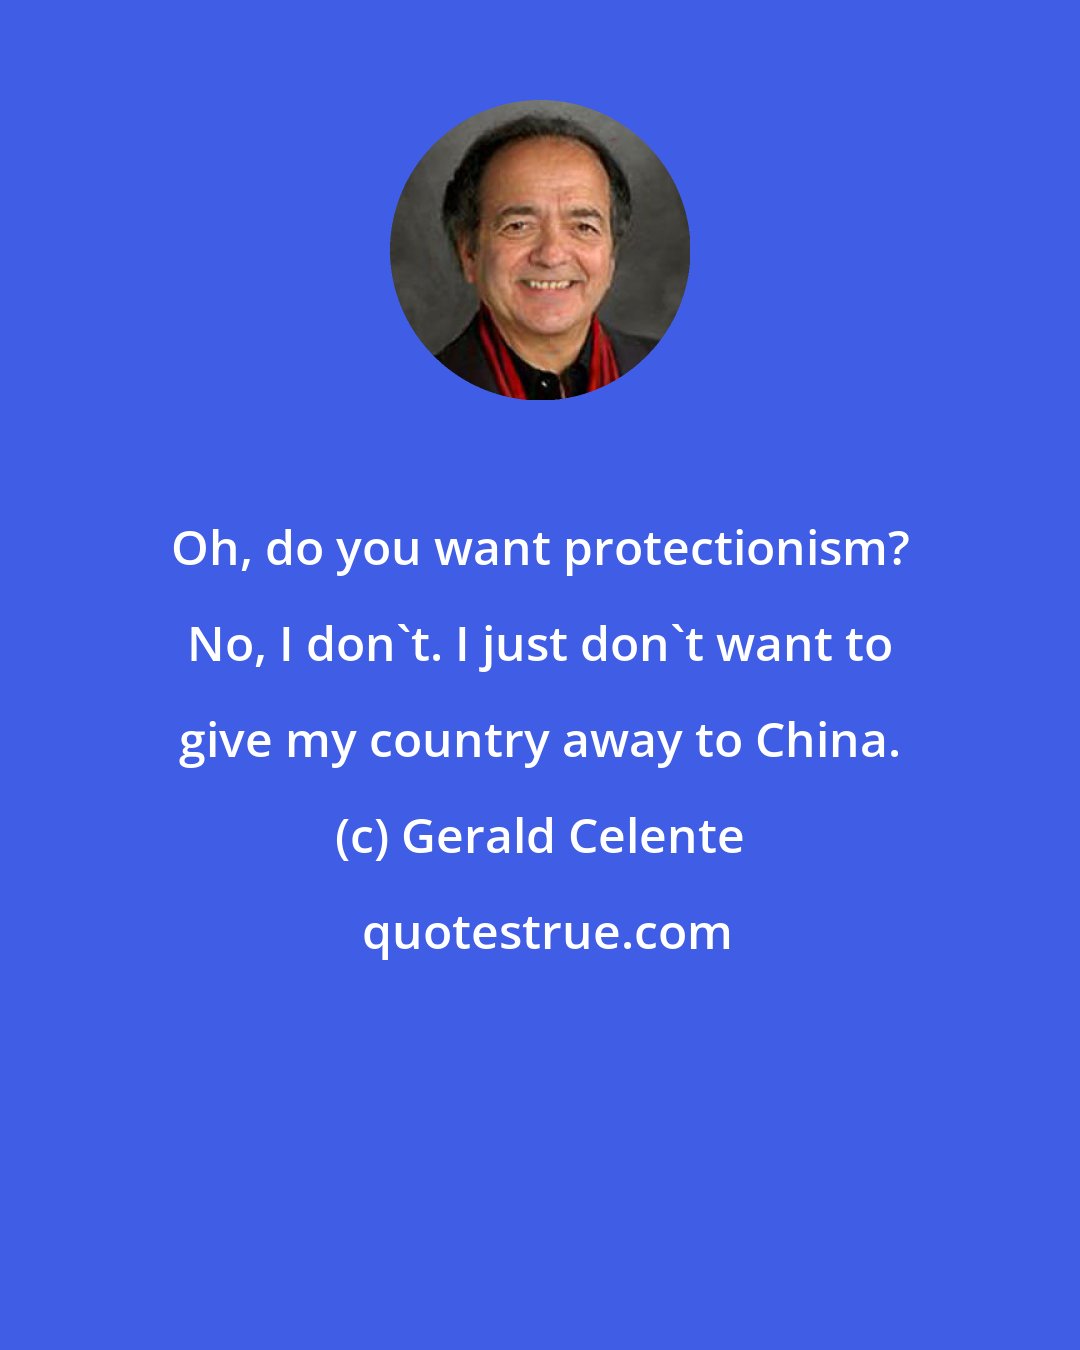 Gerald Celente: Oh, do you want protectionism? No, I don't. I just don't want to give my country away to China.